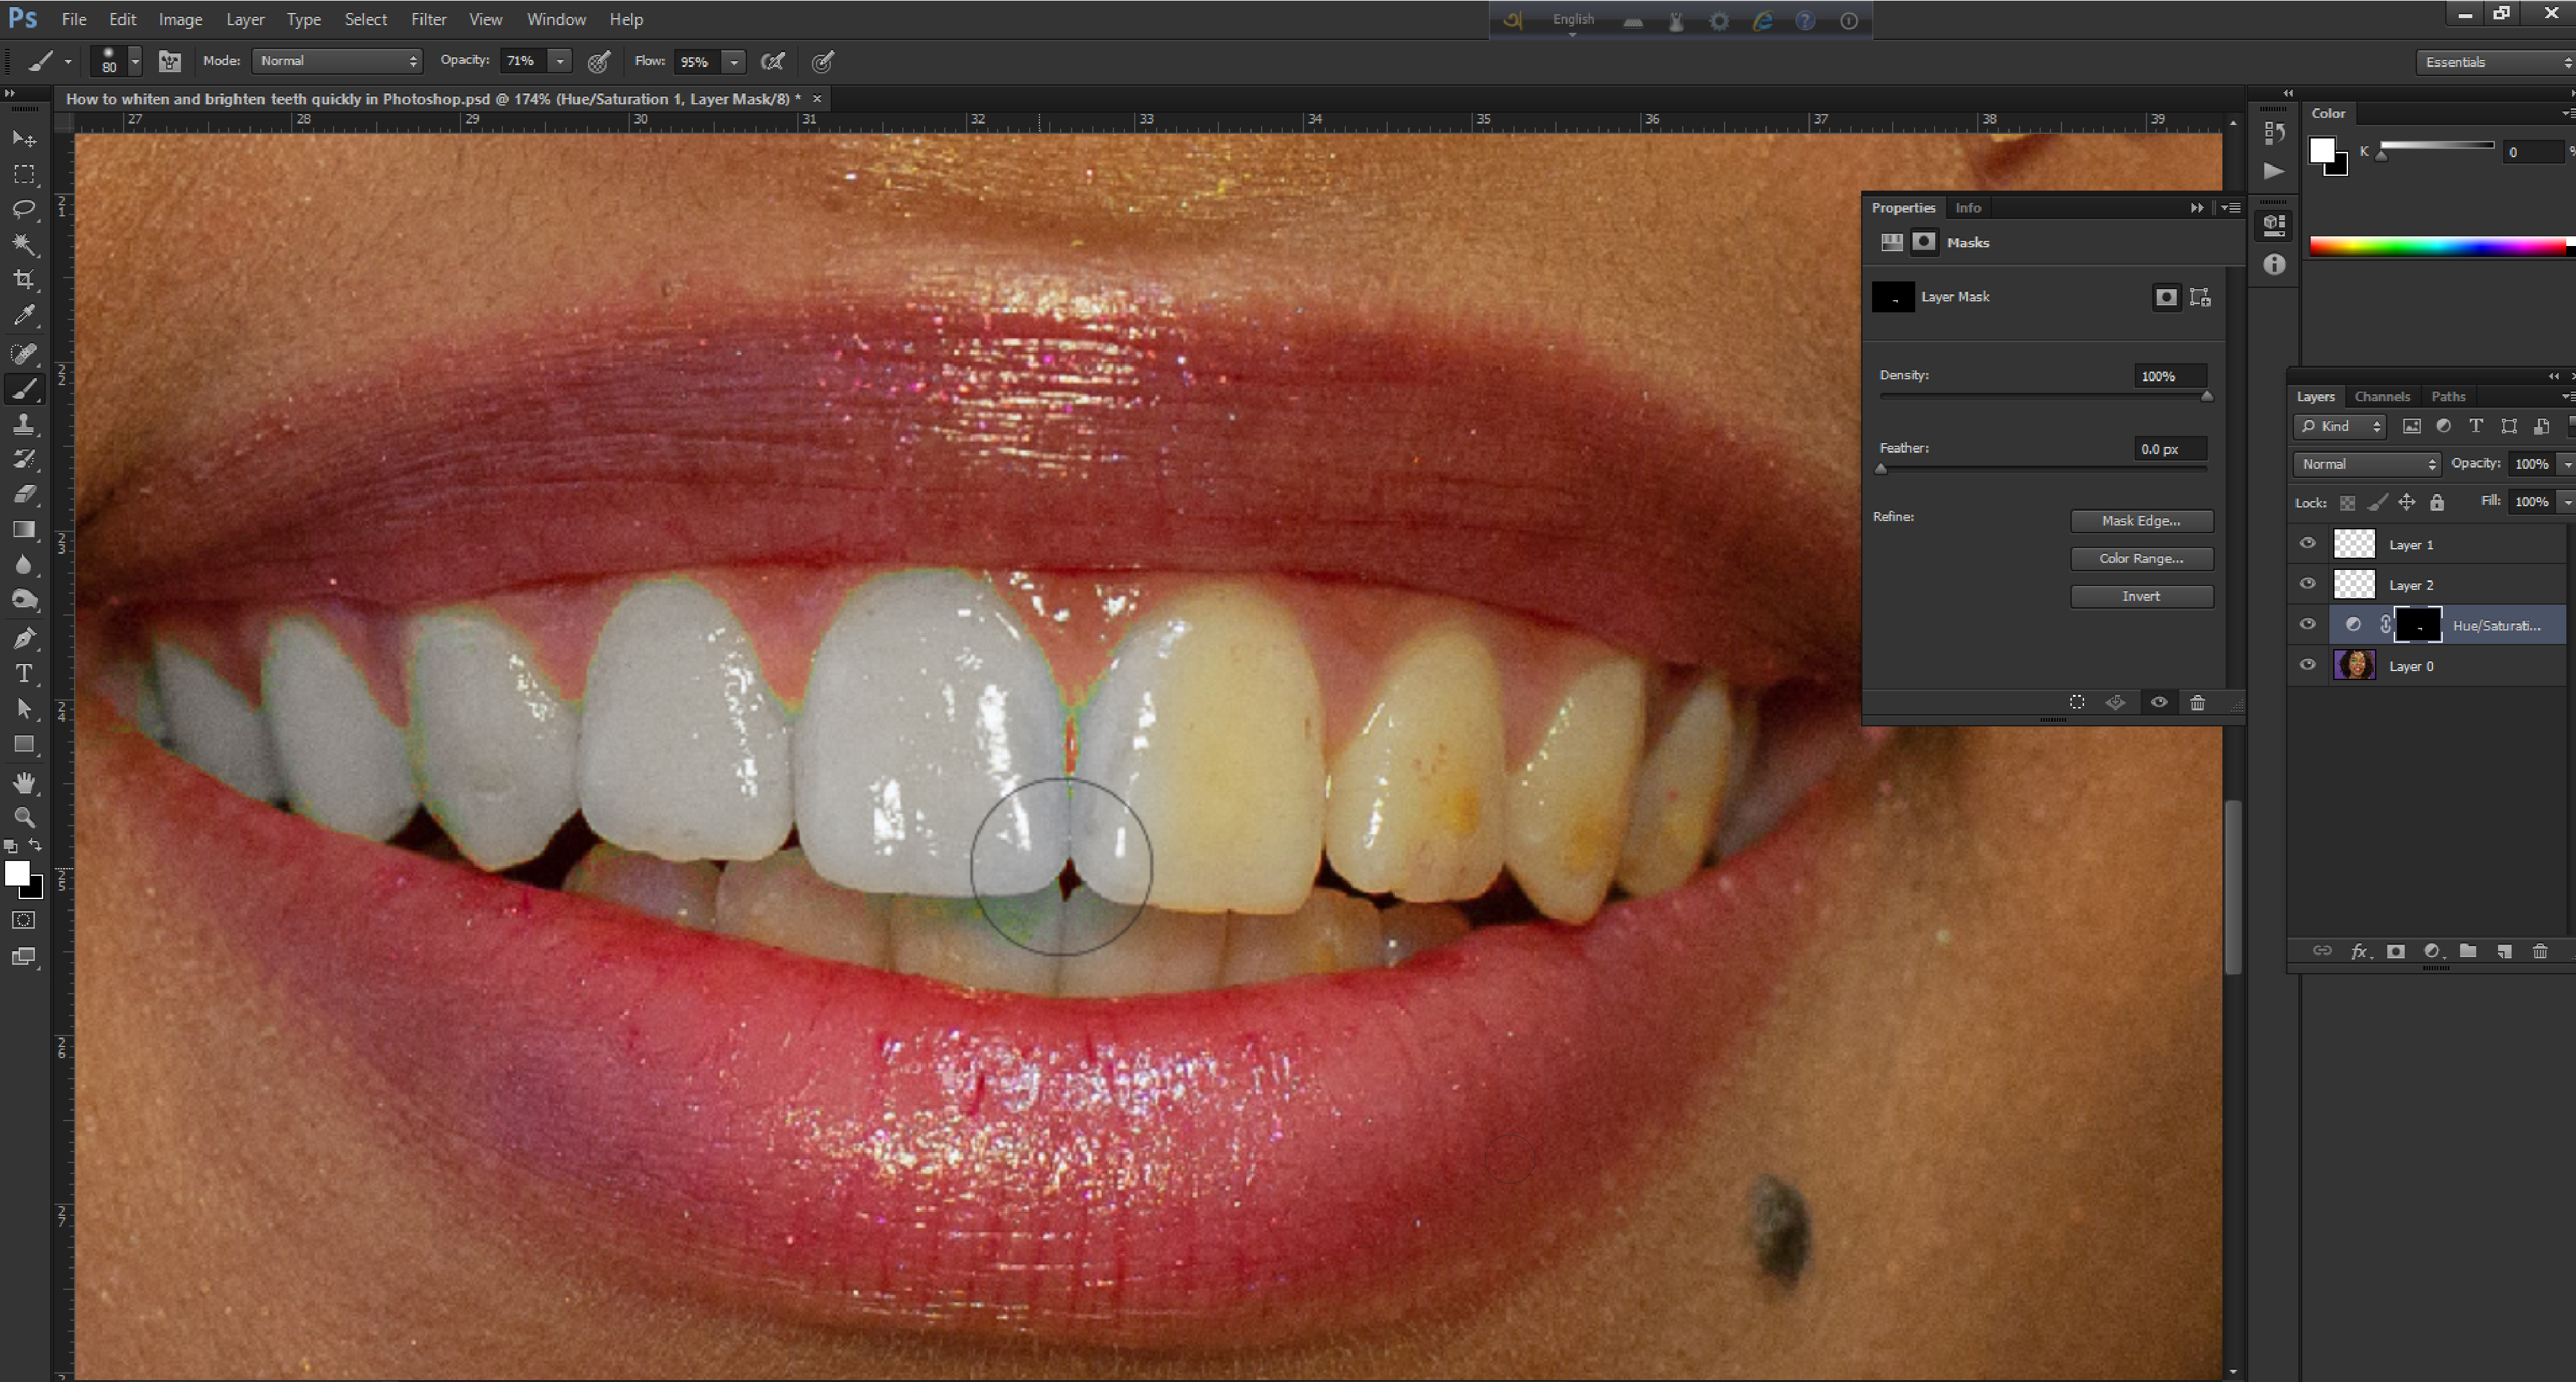 How to whiten and brighten teeth quickly in Photoshop(creativea2z)